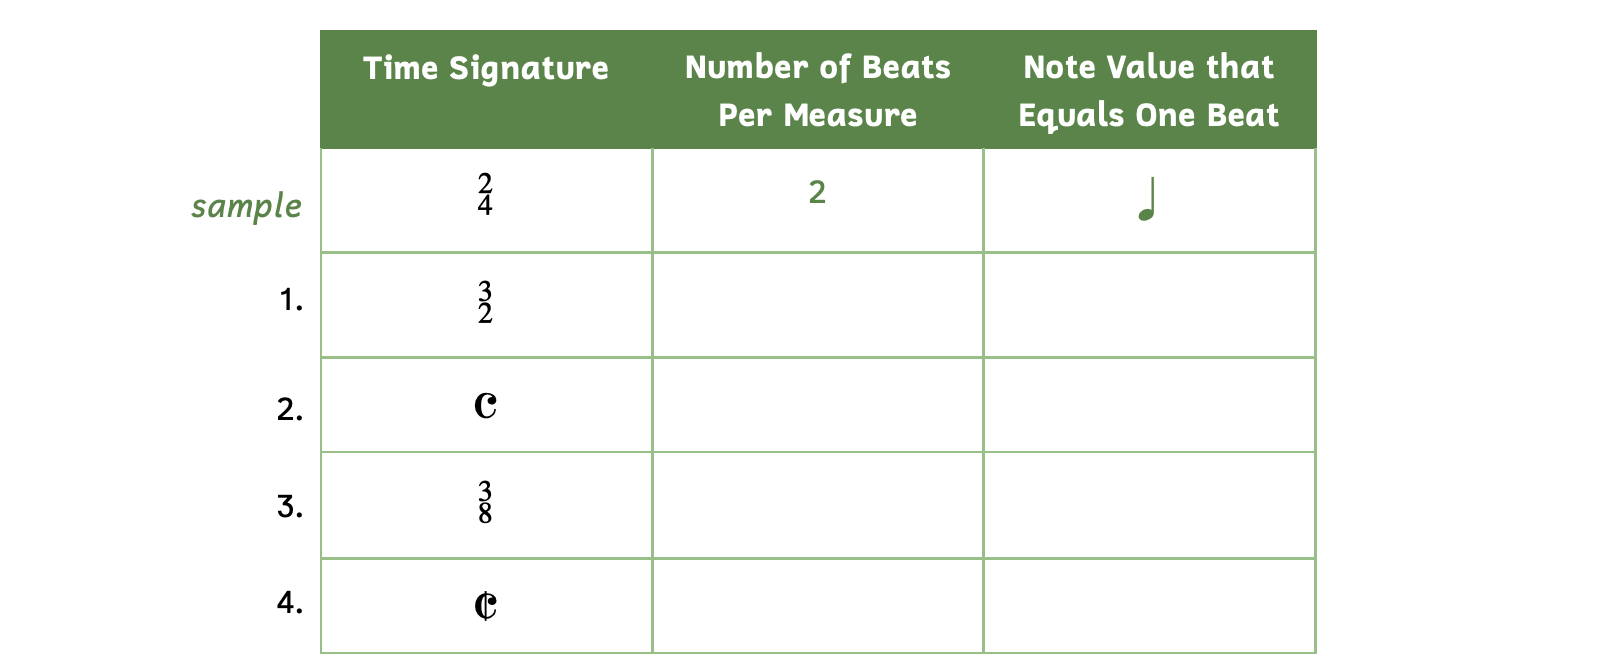 The first column gives you the time signature. The second column asks for the number of beats per measure. The third column asks for the note value that equals one beat. The sample shows that the time signature is 2-4. There are 2 beats per measure and the quarter note equals one beat. Number 1, 3-2. Number 2, common time. Number 3, 3-8. Number 4, cut time.